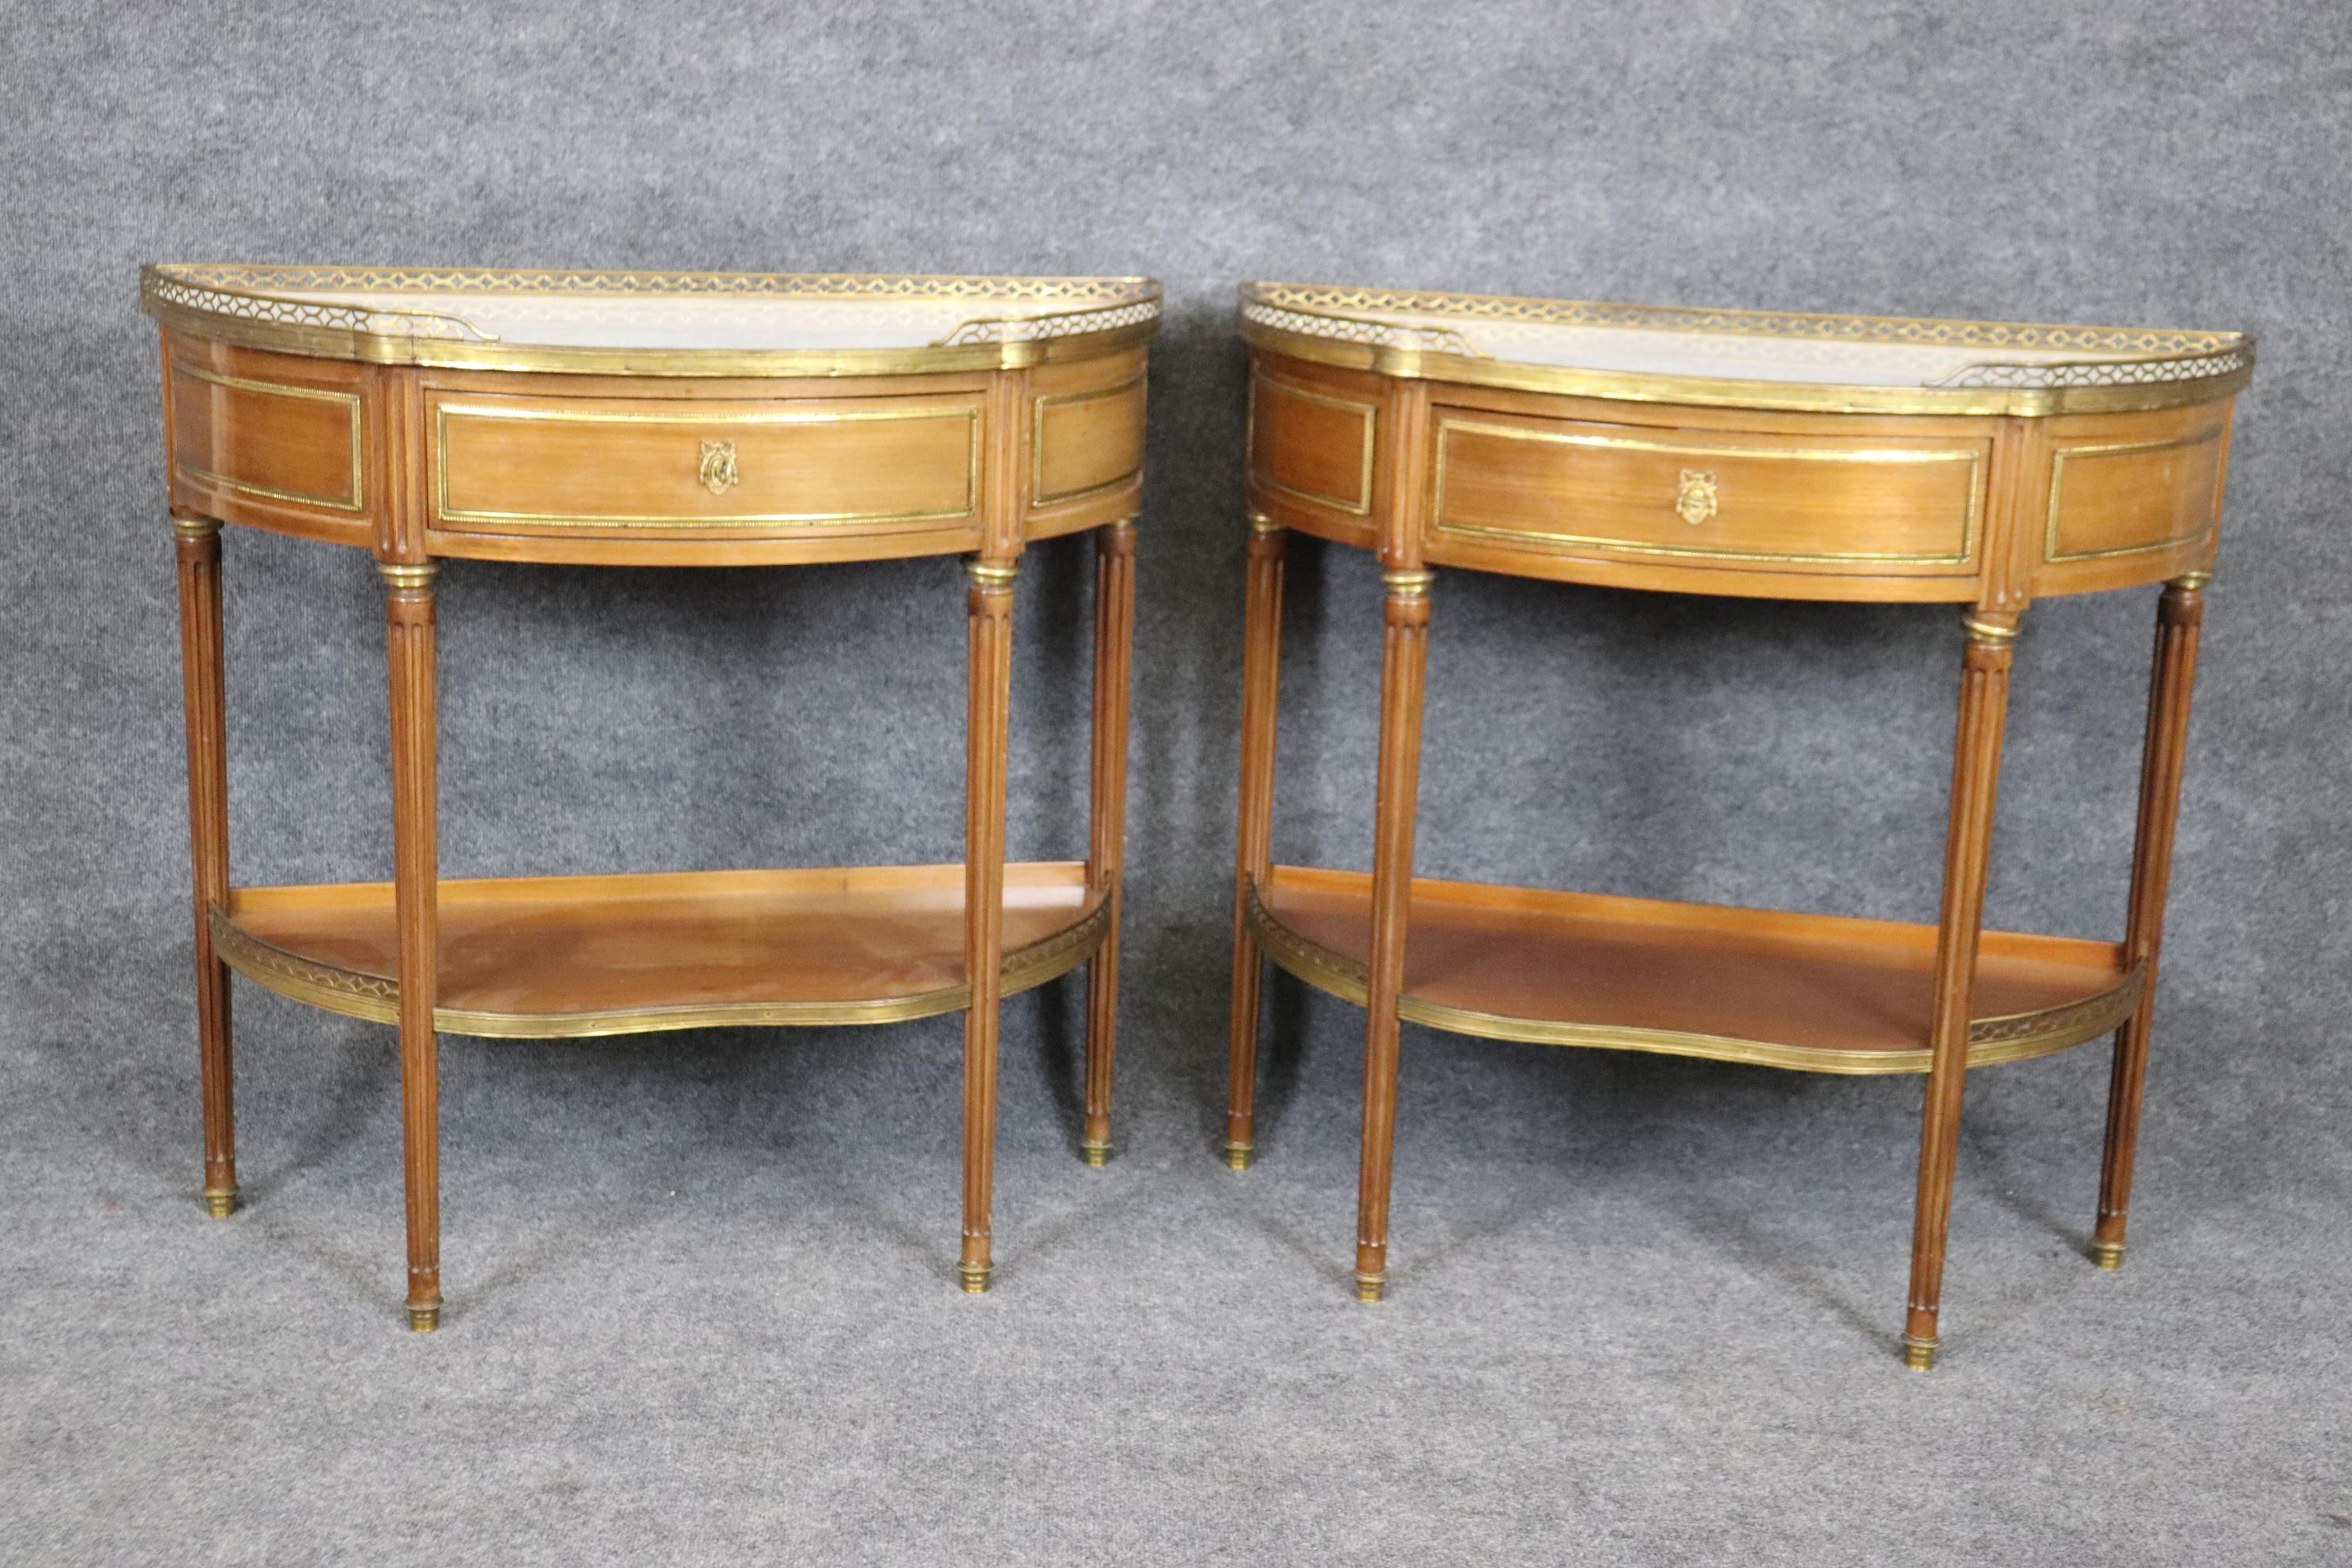  Superb Pair of Marble Top Bronze Mounted French Demilune Console Tables  For Sale 1